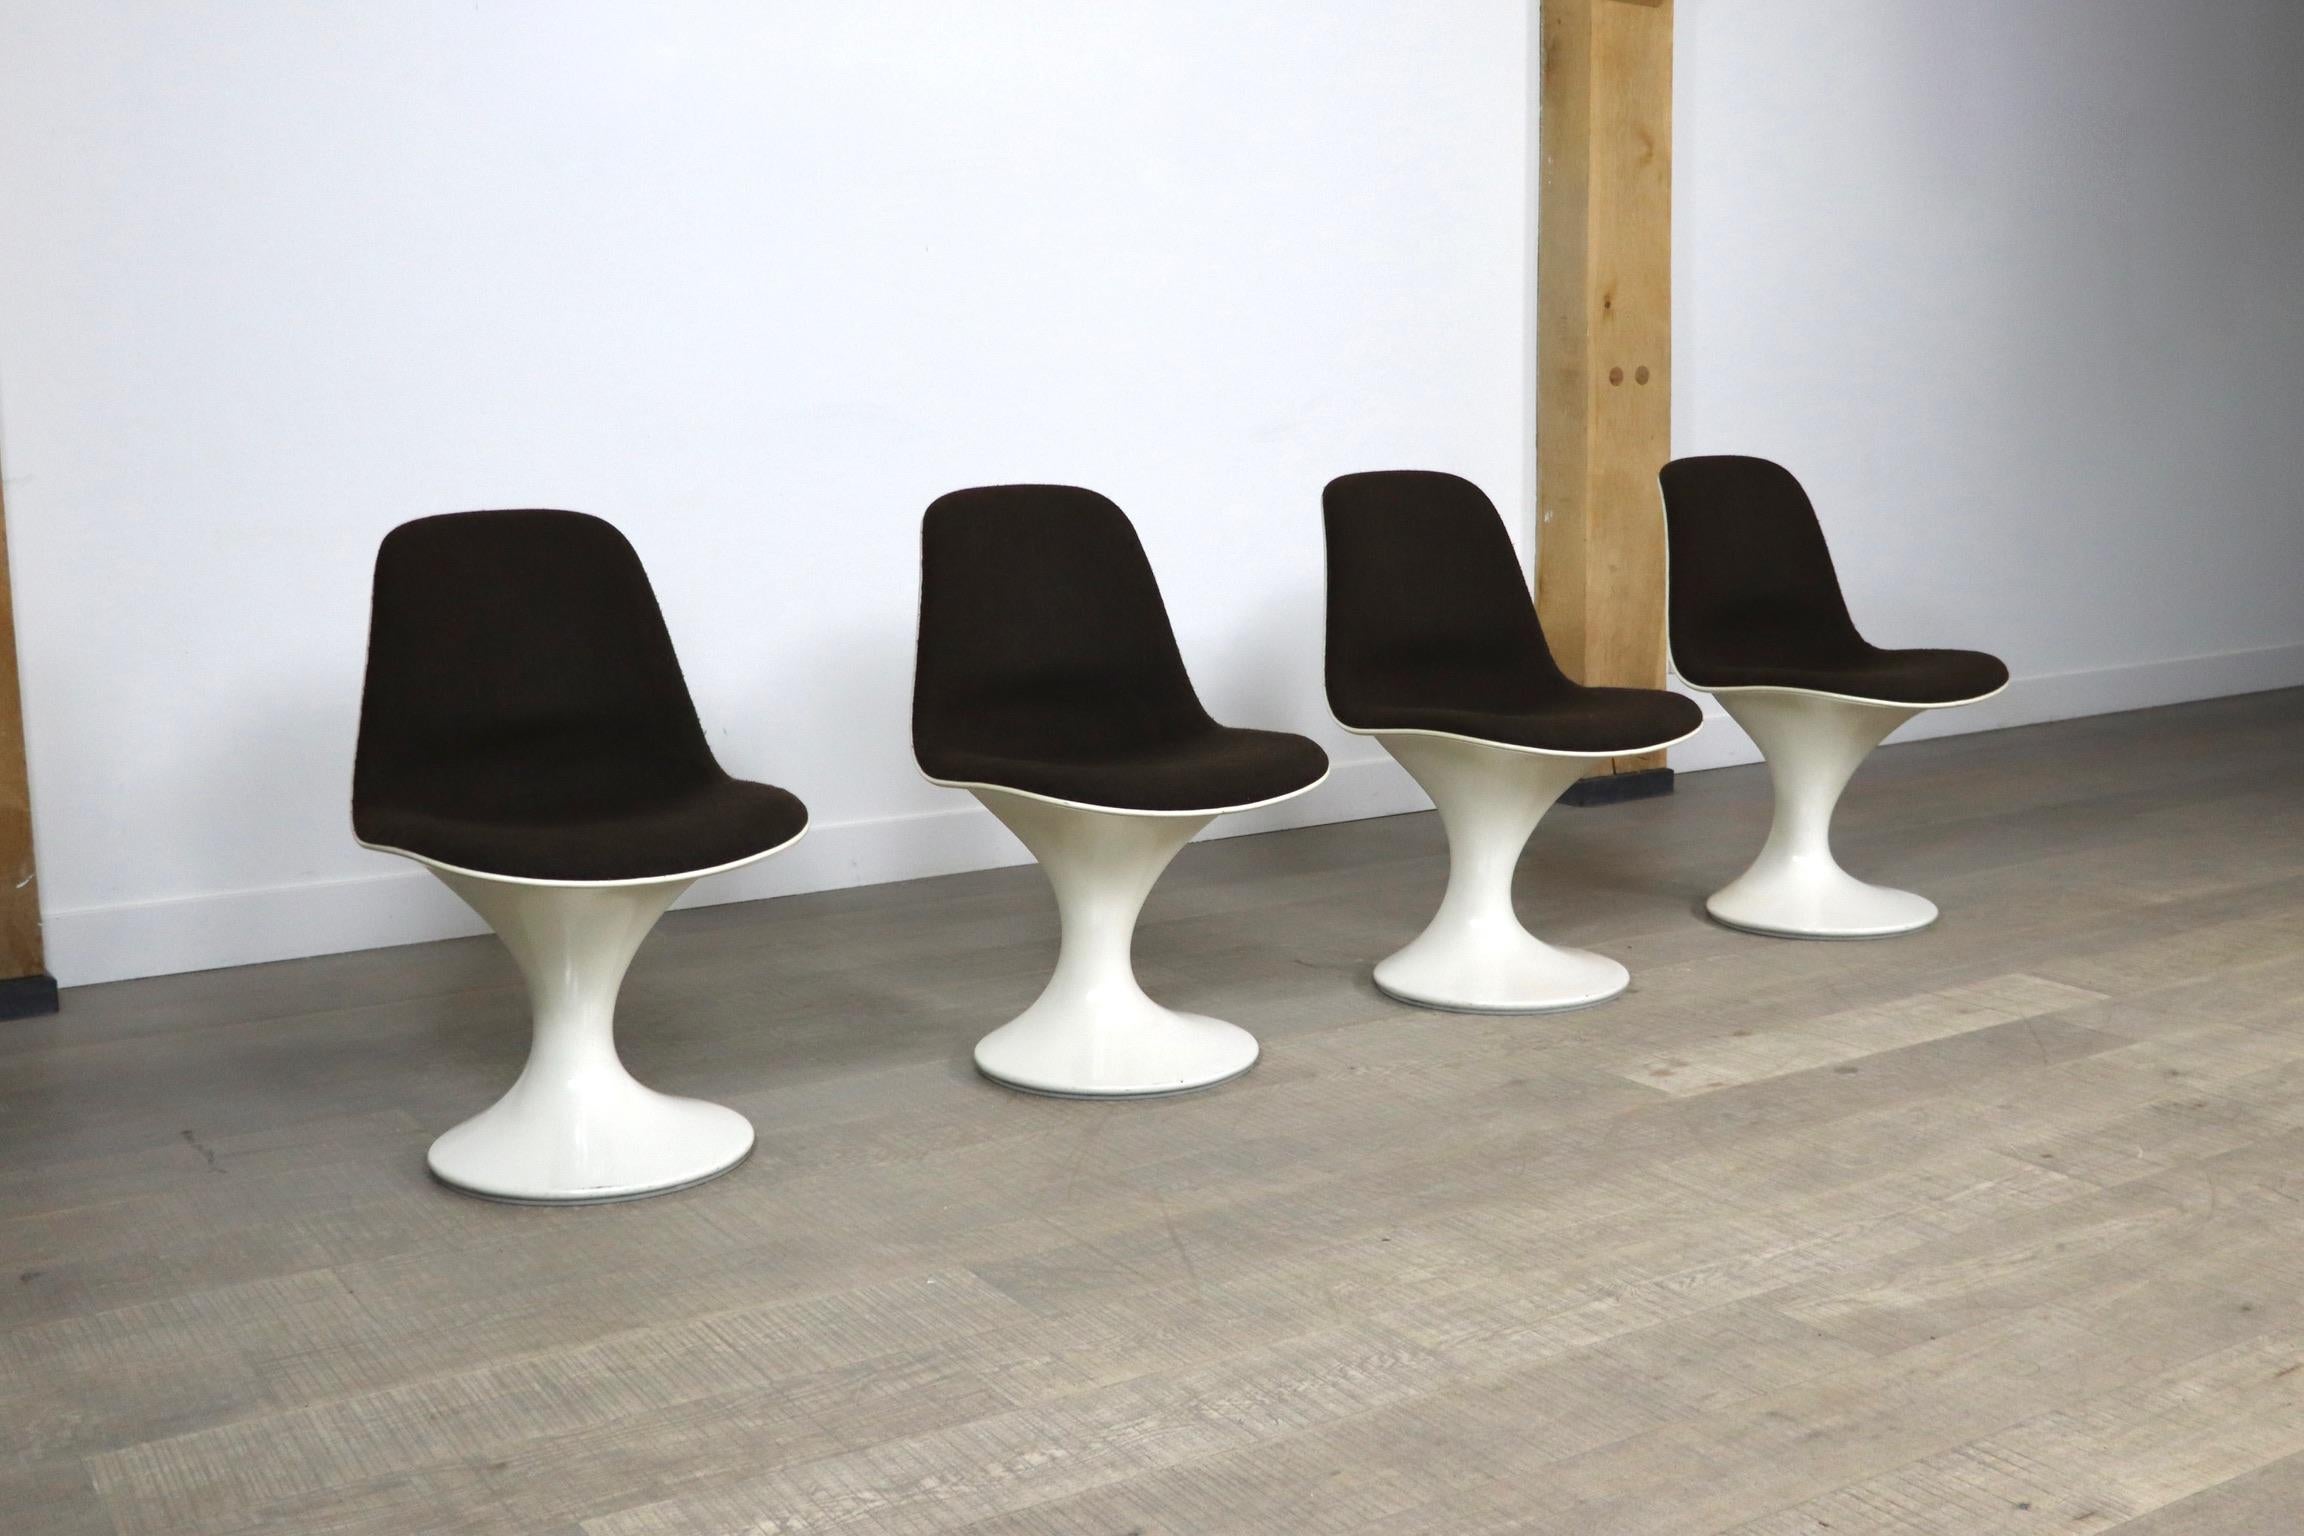 Rare set of 4 Herman Miller Orbit chairs designed by Farner and Grunder for Herman Miller, 1965. This unique space age set will be the perfect addition of any dining room! The rounded shape and nice combination of off-white/cream fiberglass and